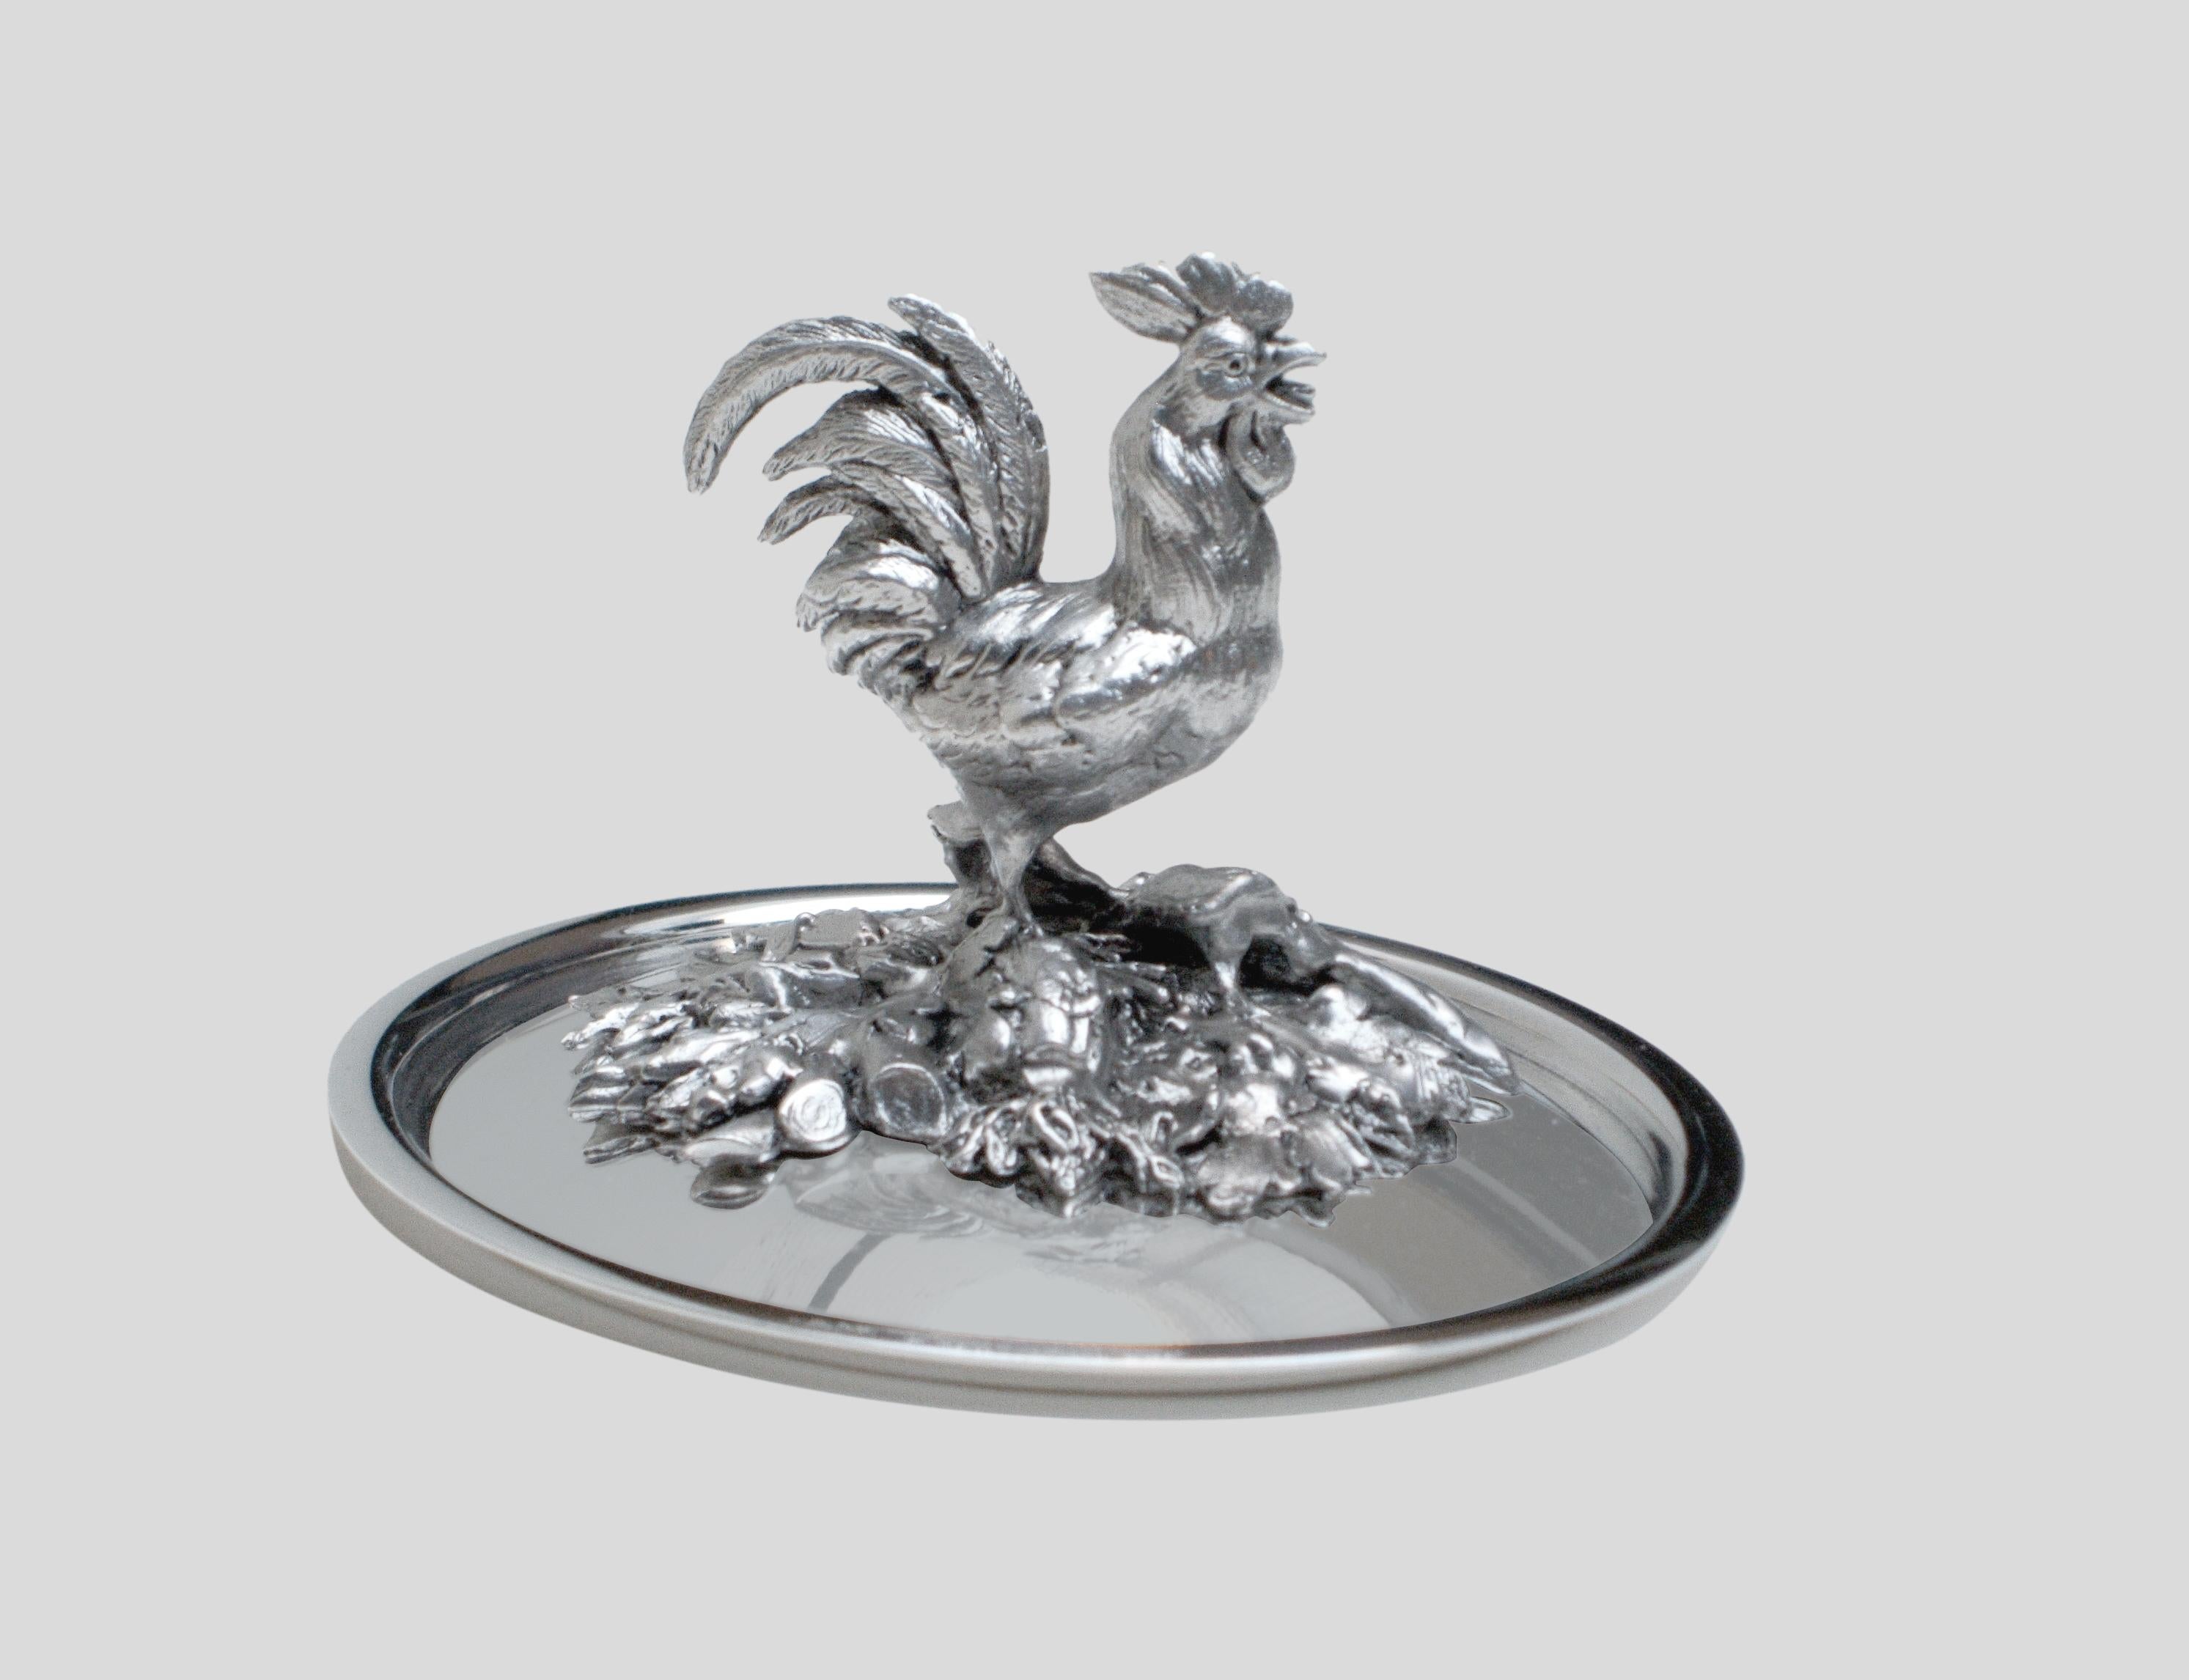 This design was created for Maison Lapparra (silversmith in Paris since 1893) circa 1990s. Made in France. Silver plated. Measures: Height 5.5 cm, diameter 10.5 cm.
There are many decorations for the cover: vegetable decorations - fruit decorations